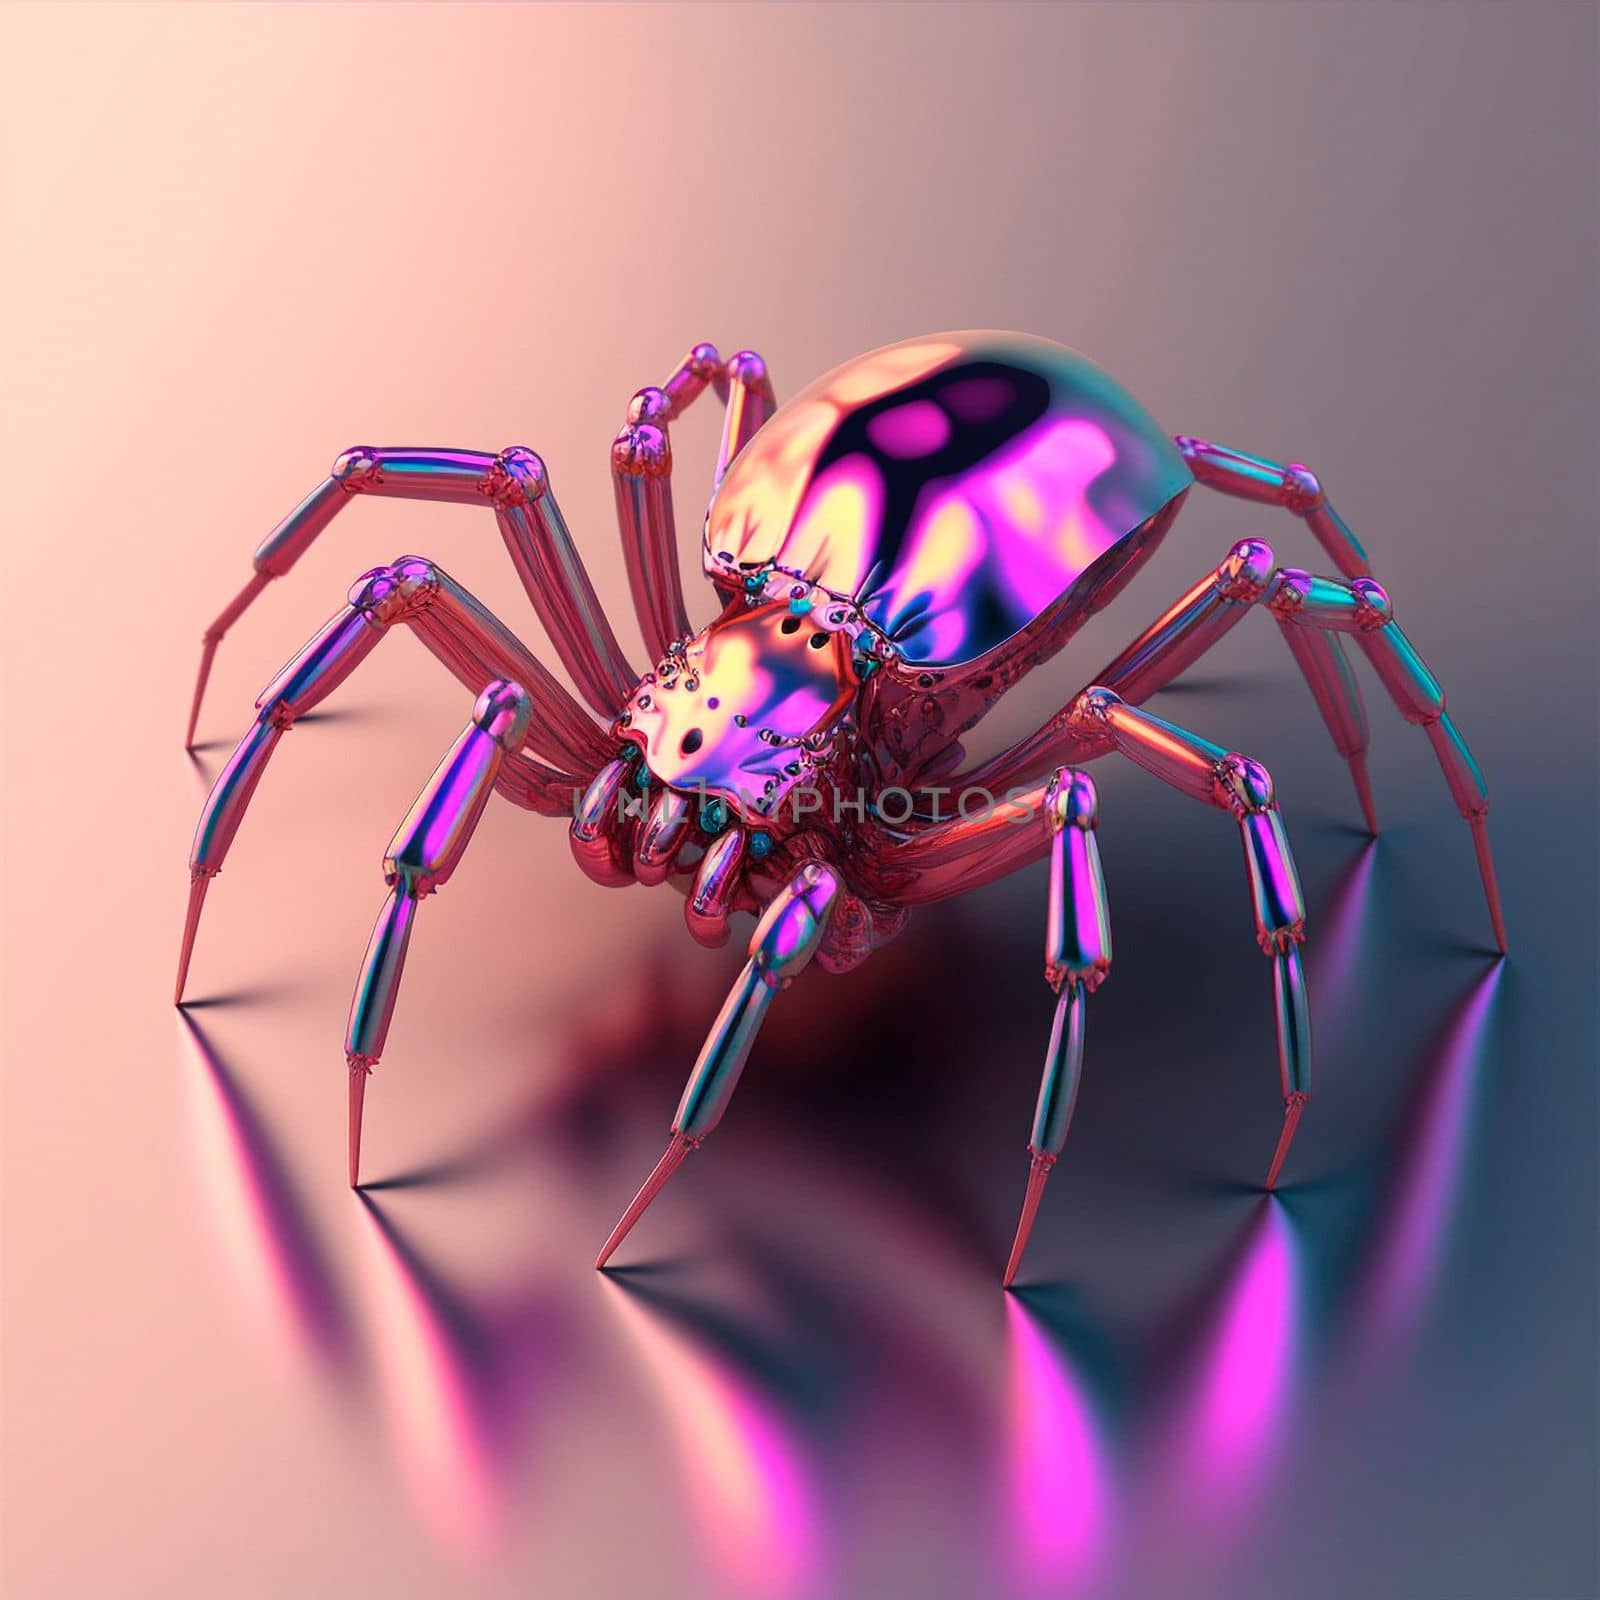 3d model of a pink and gold spider. Shiny , glossy figure. High quality illustration